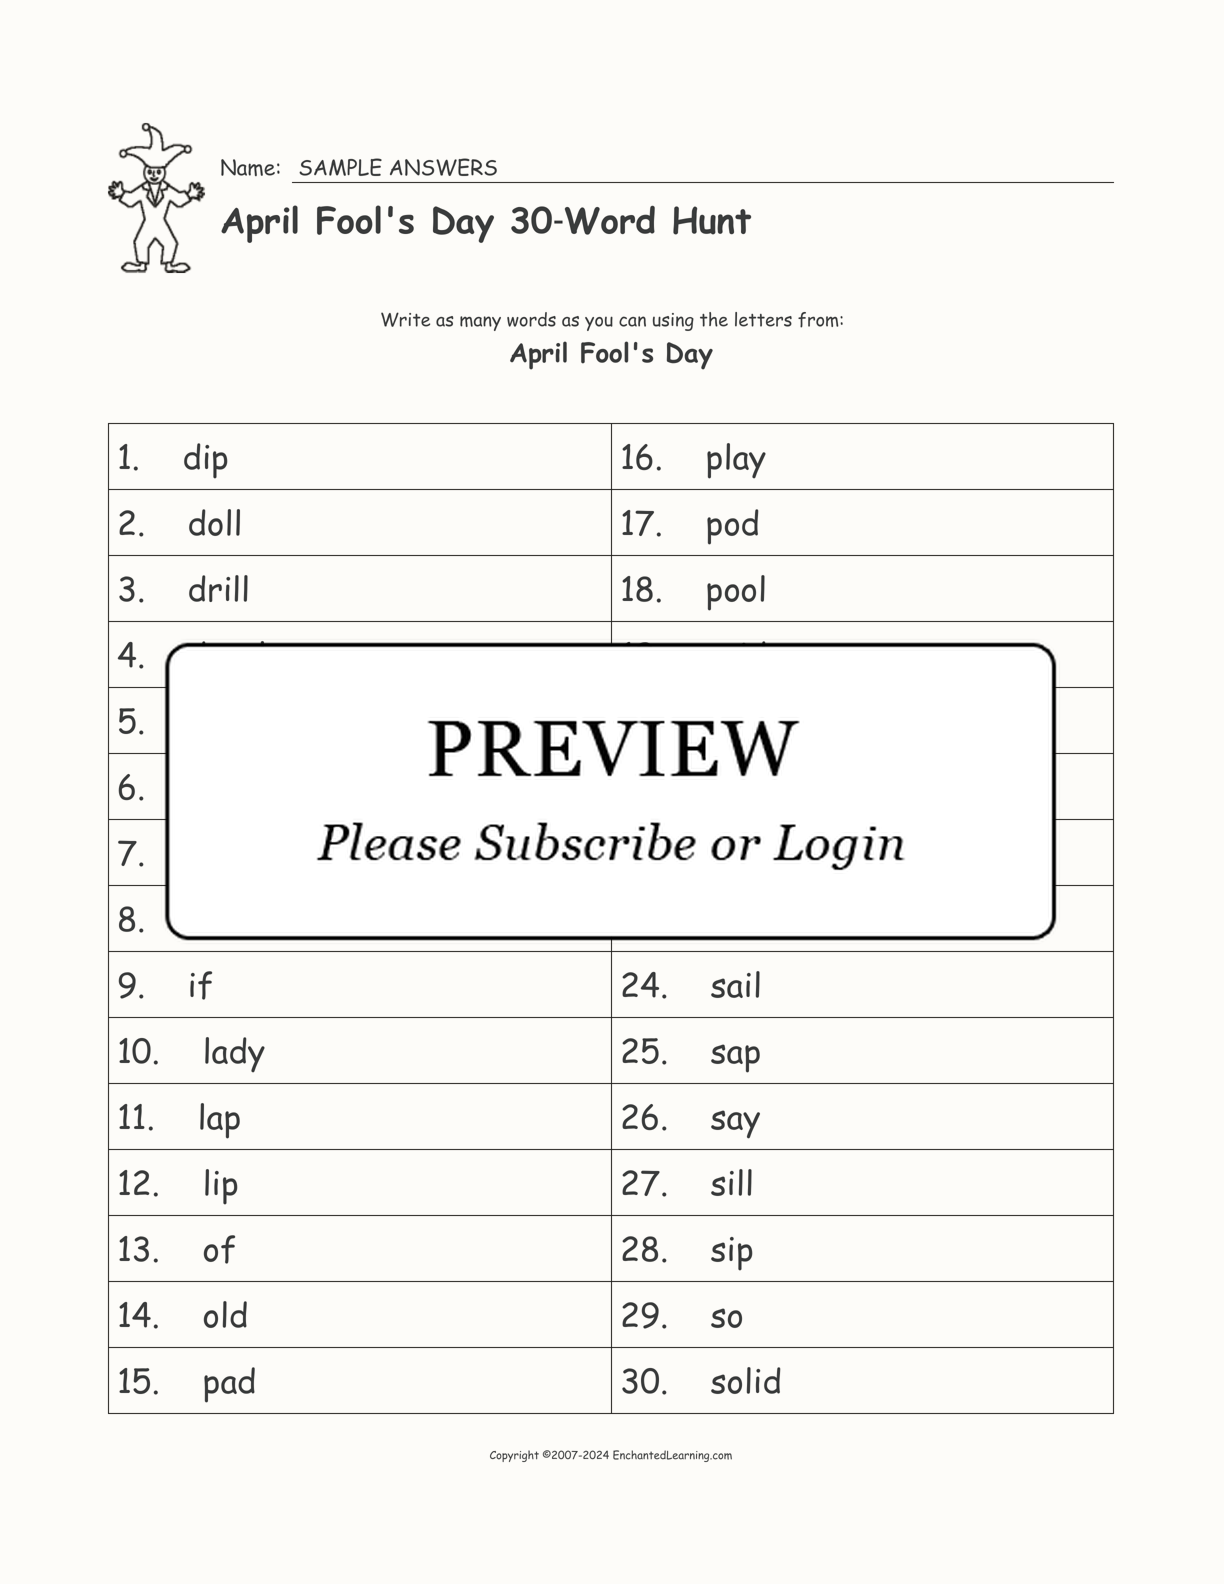 April Fool's Day 30‑Word Hunt interactive worksheet page 2